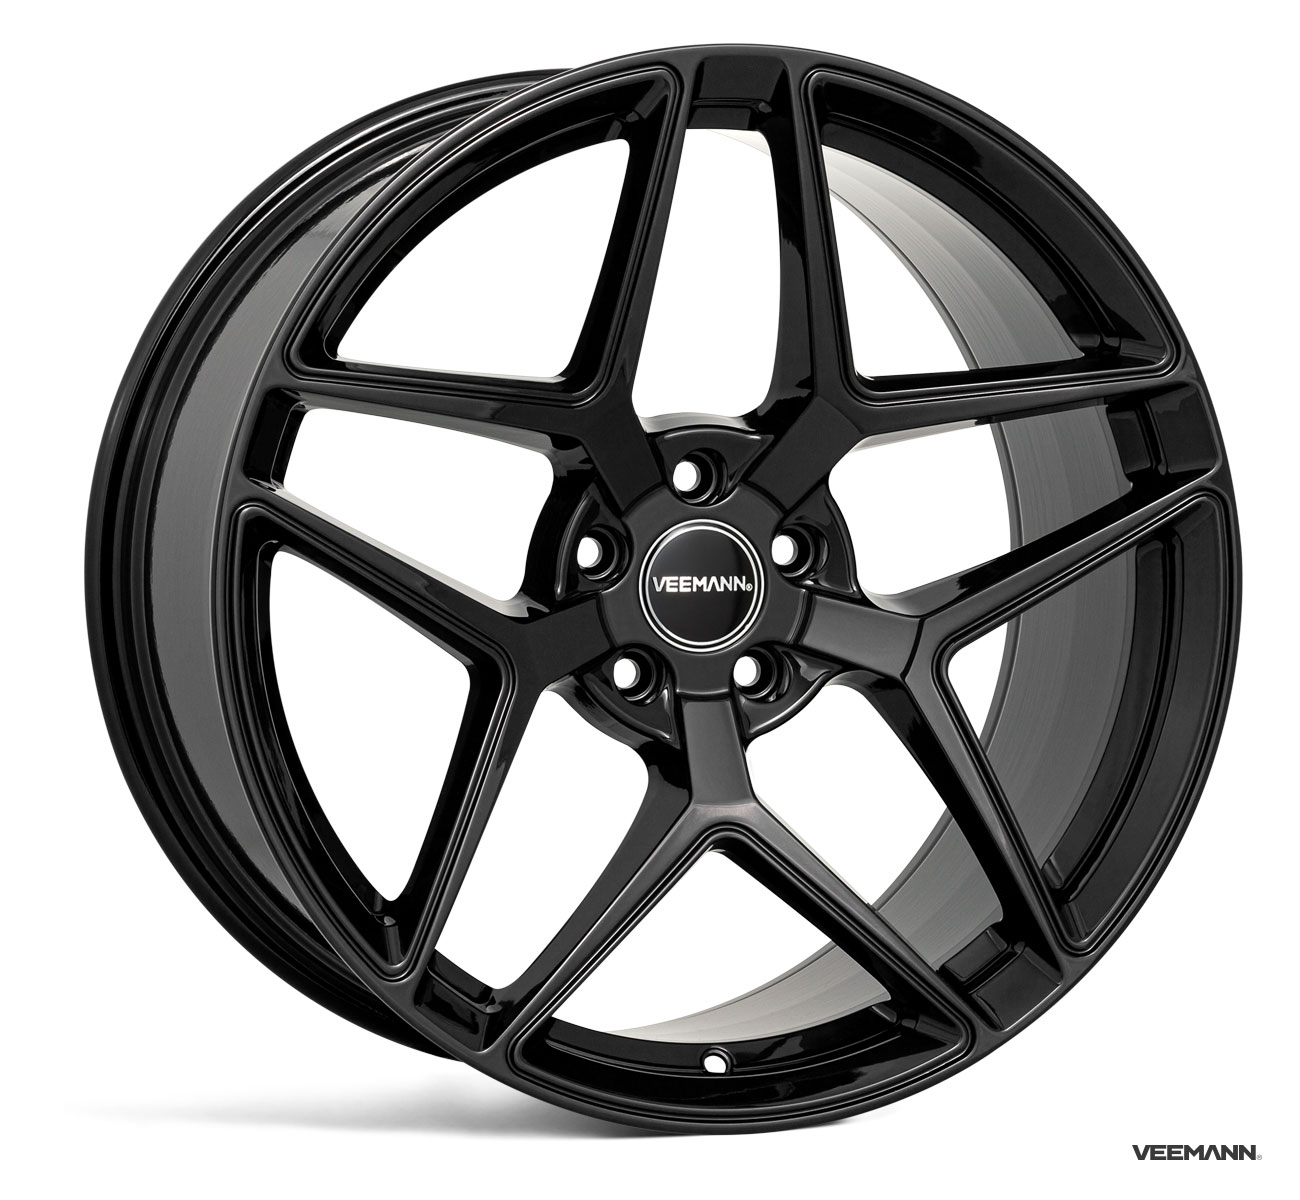 NEW 20" VEEMANN VC650 ALLOY WHEELS IN GLOSS BLACK WITH WIDER 10" REARS